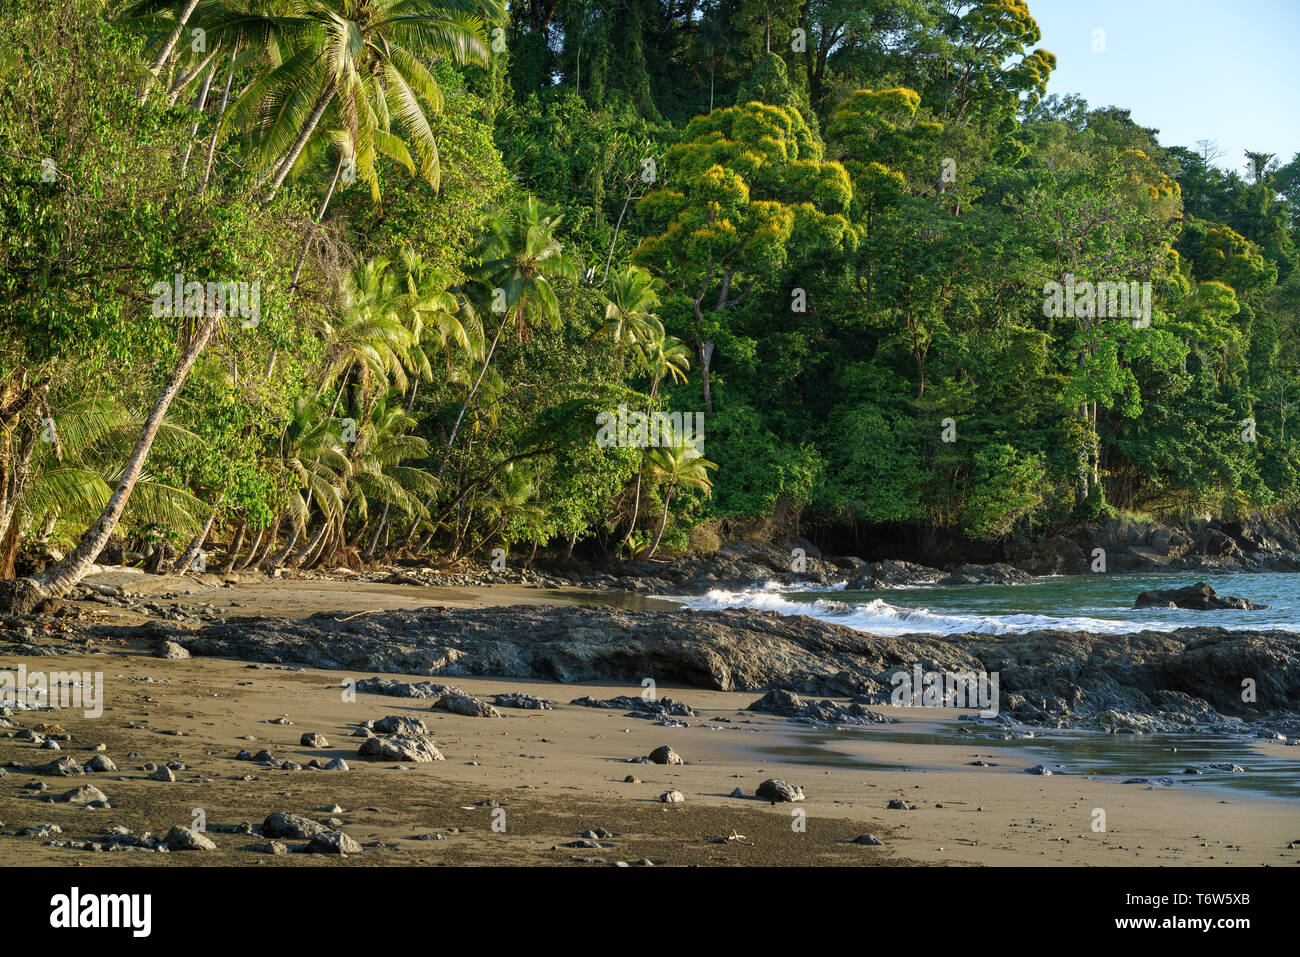 Wild natural beach lined by tropical rainforest Stock Photo